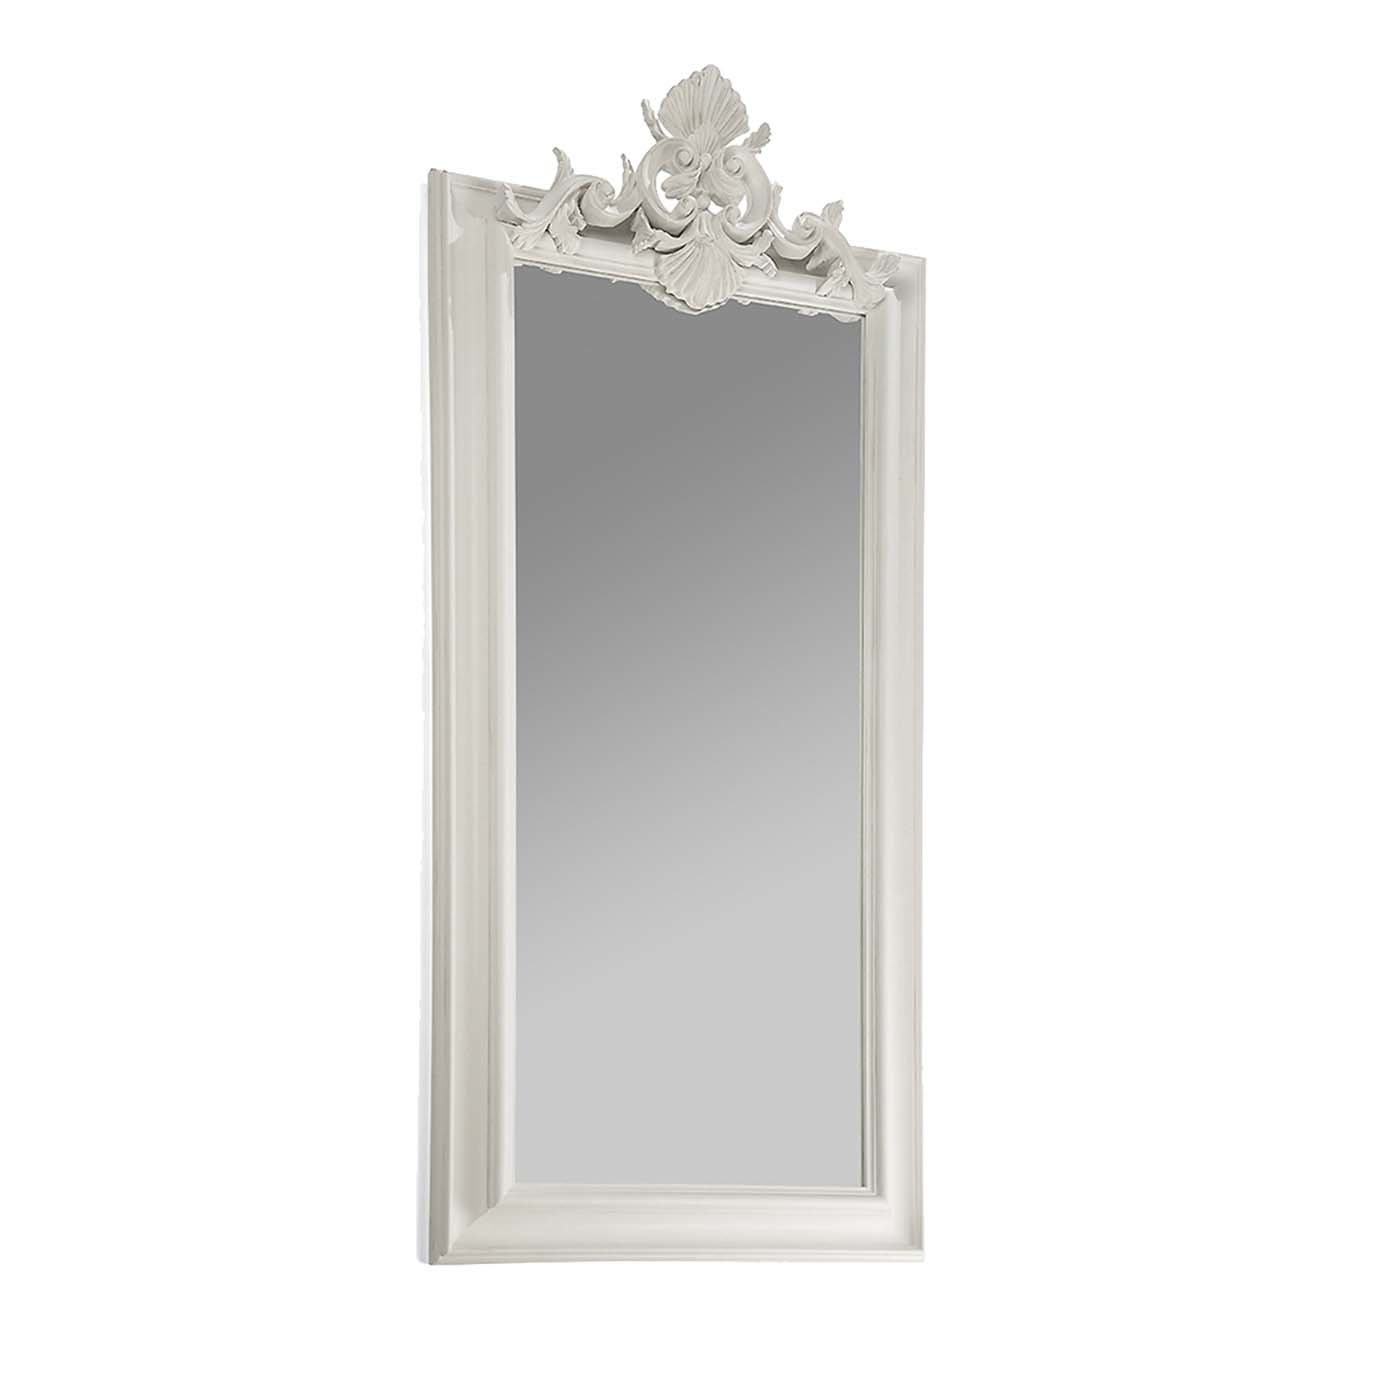 Buthan Wall Mirror - Marioni